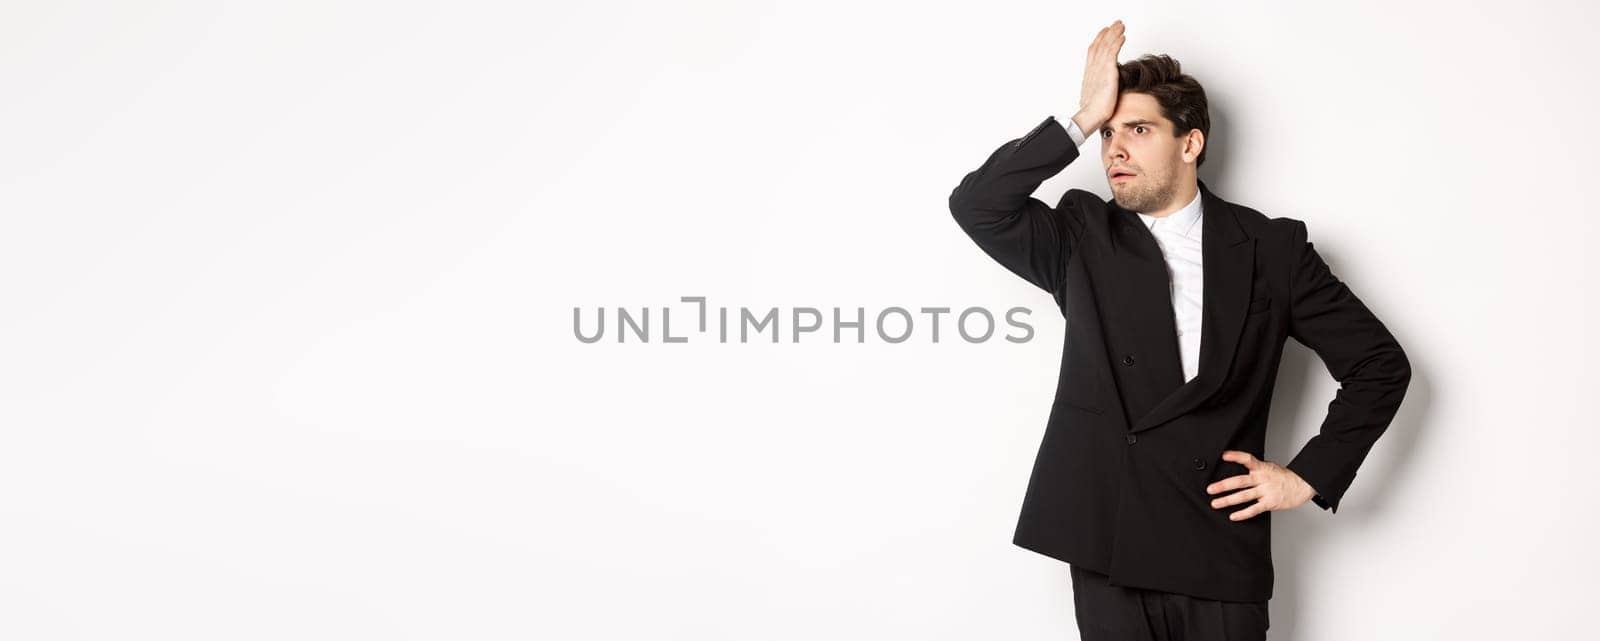 Portrait of shocked and distressed businessman in black suit, slap forehead and looking anxious, standing troubled over white background.